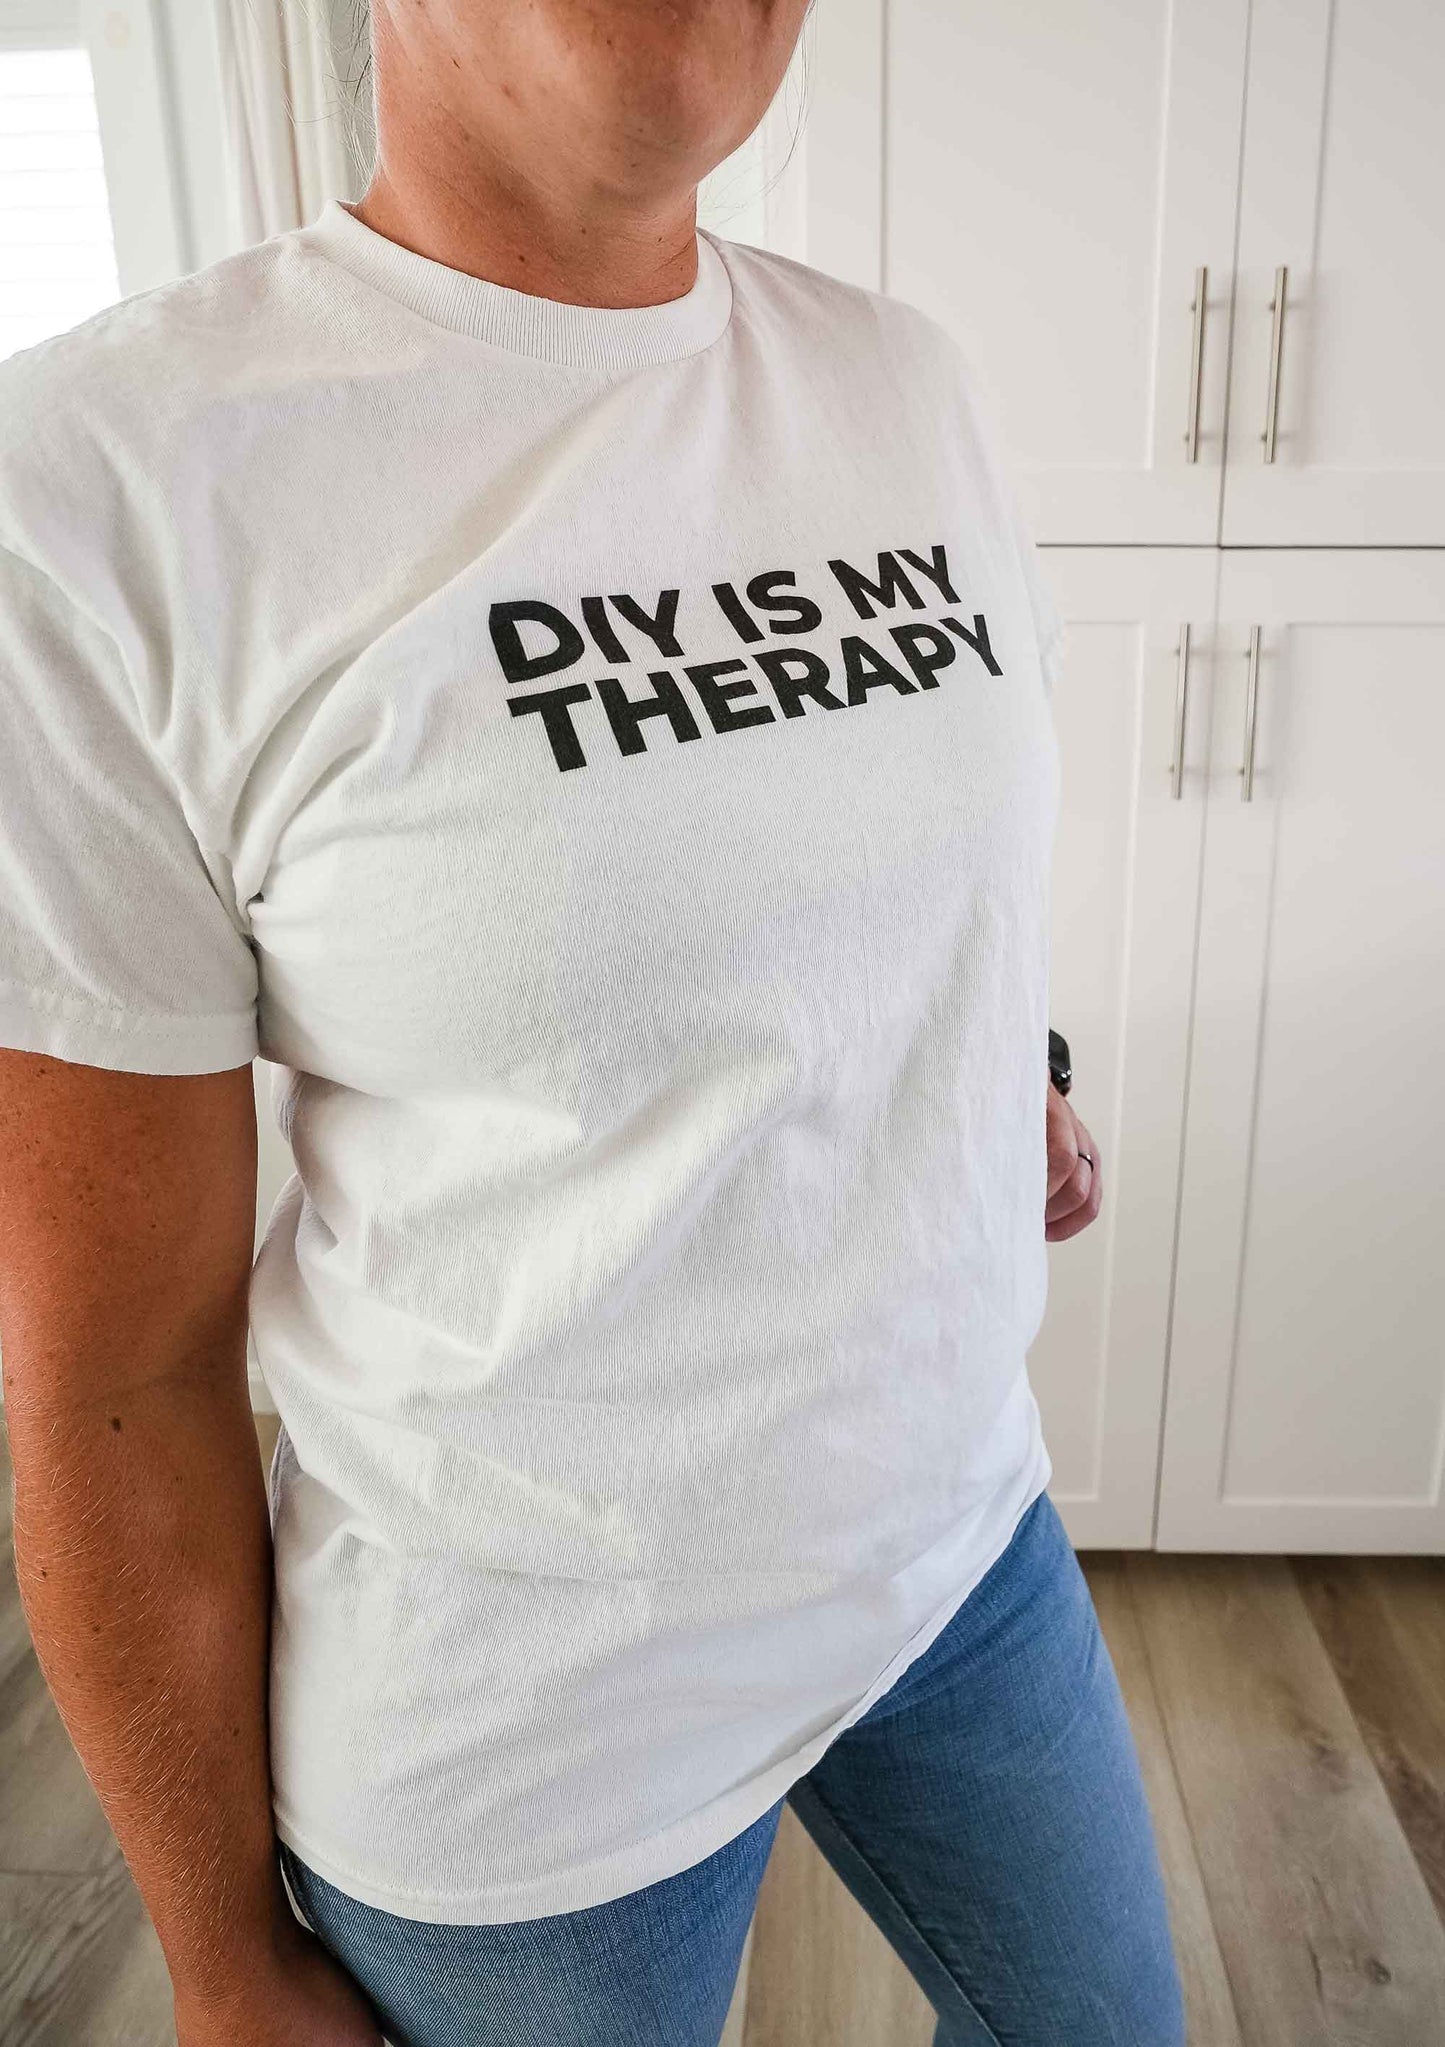 DIY Is My Therapy T-shirt, DIY Is My Therapy Shirt, DIY Shirt